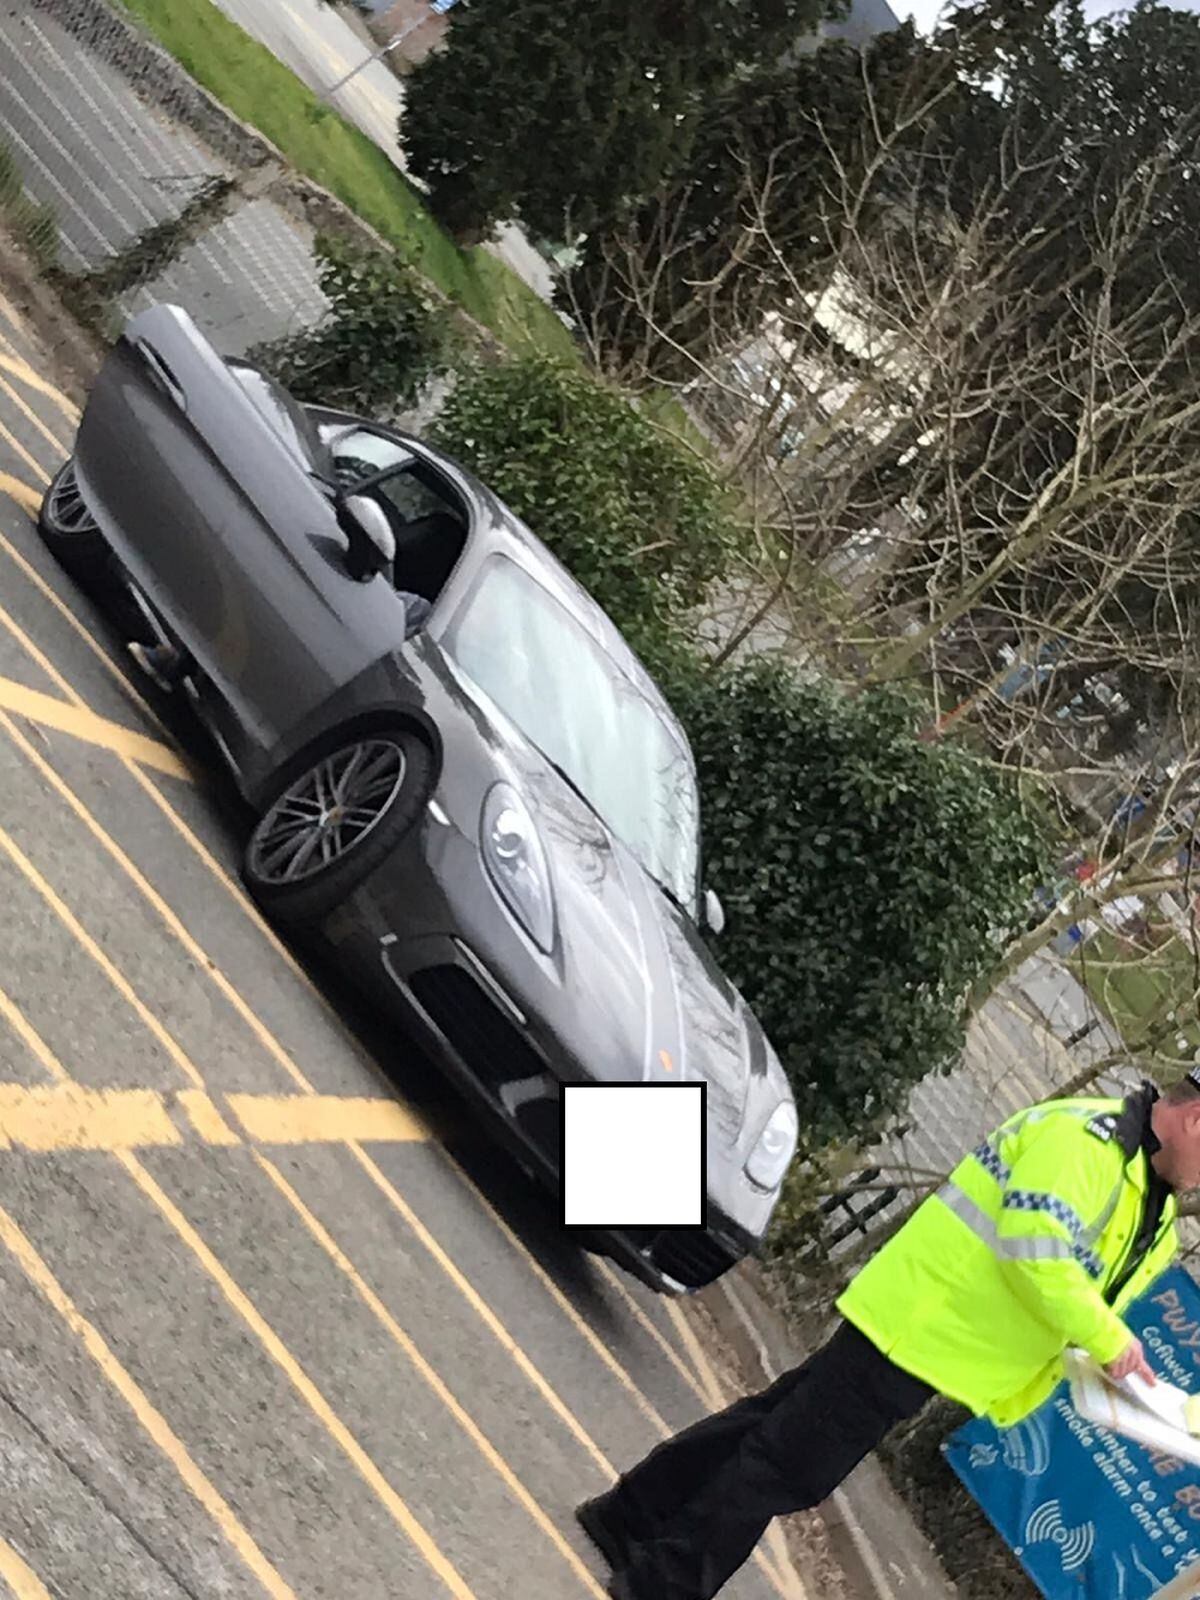 Shropshire Porsche driver stopped in Bala. Picture: @NWPRPU